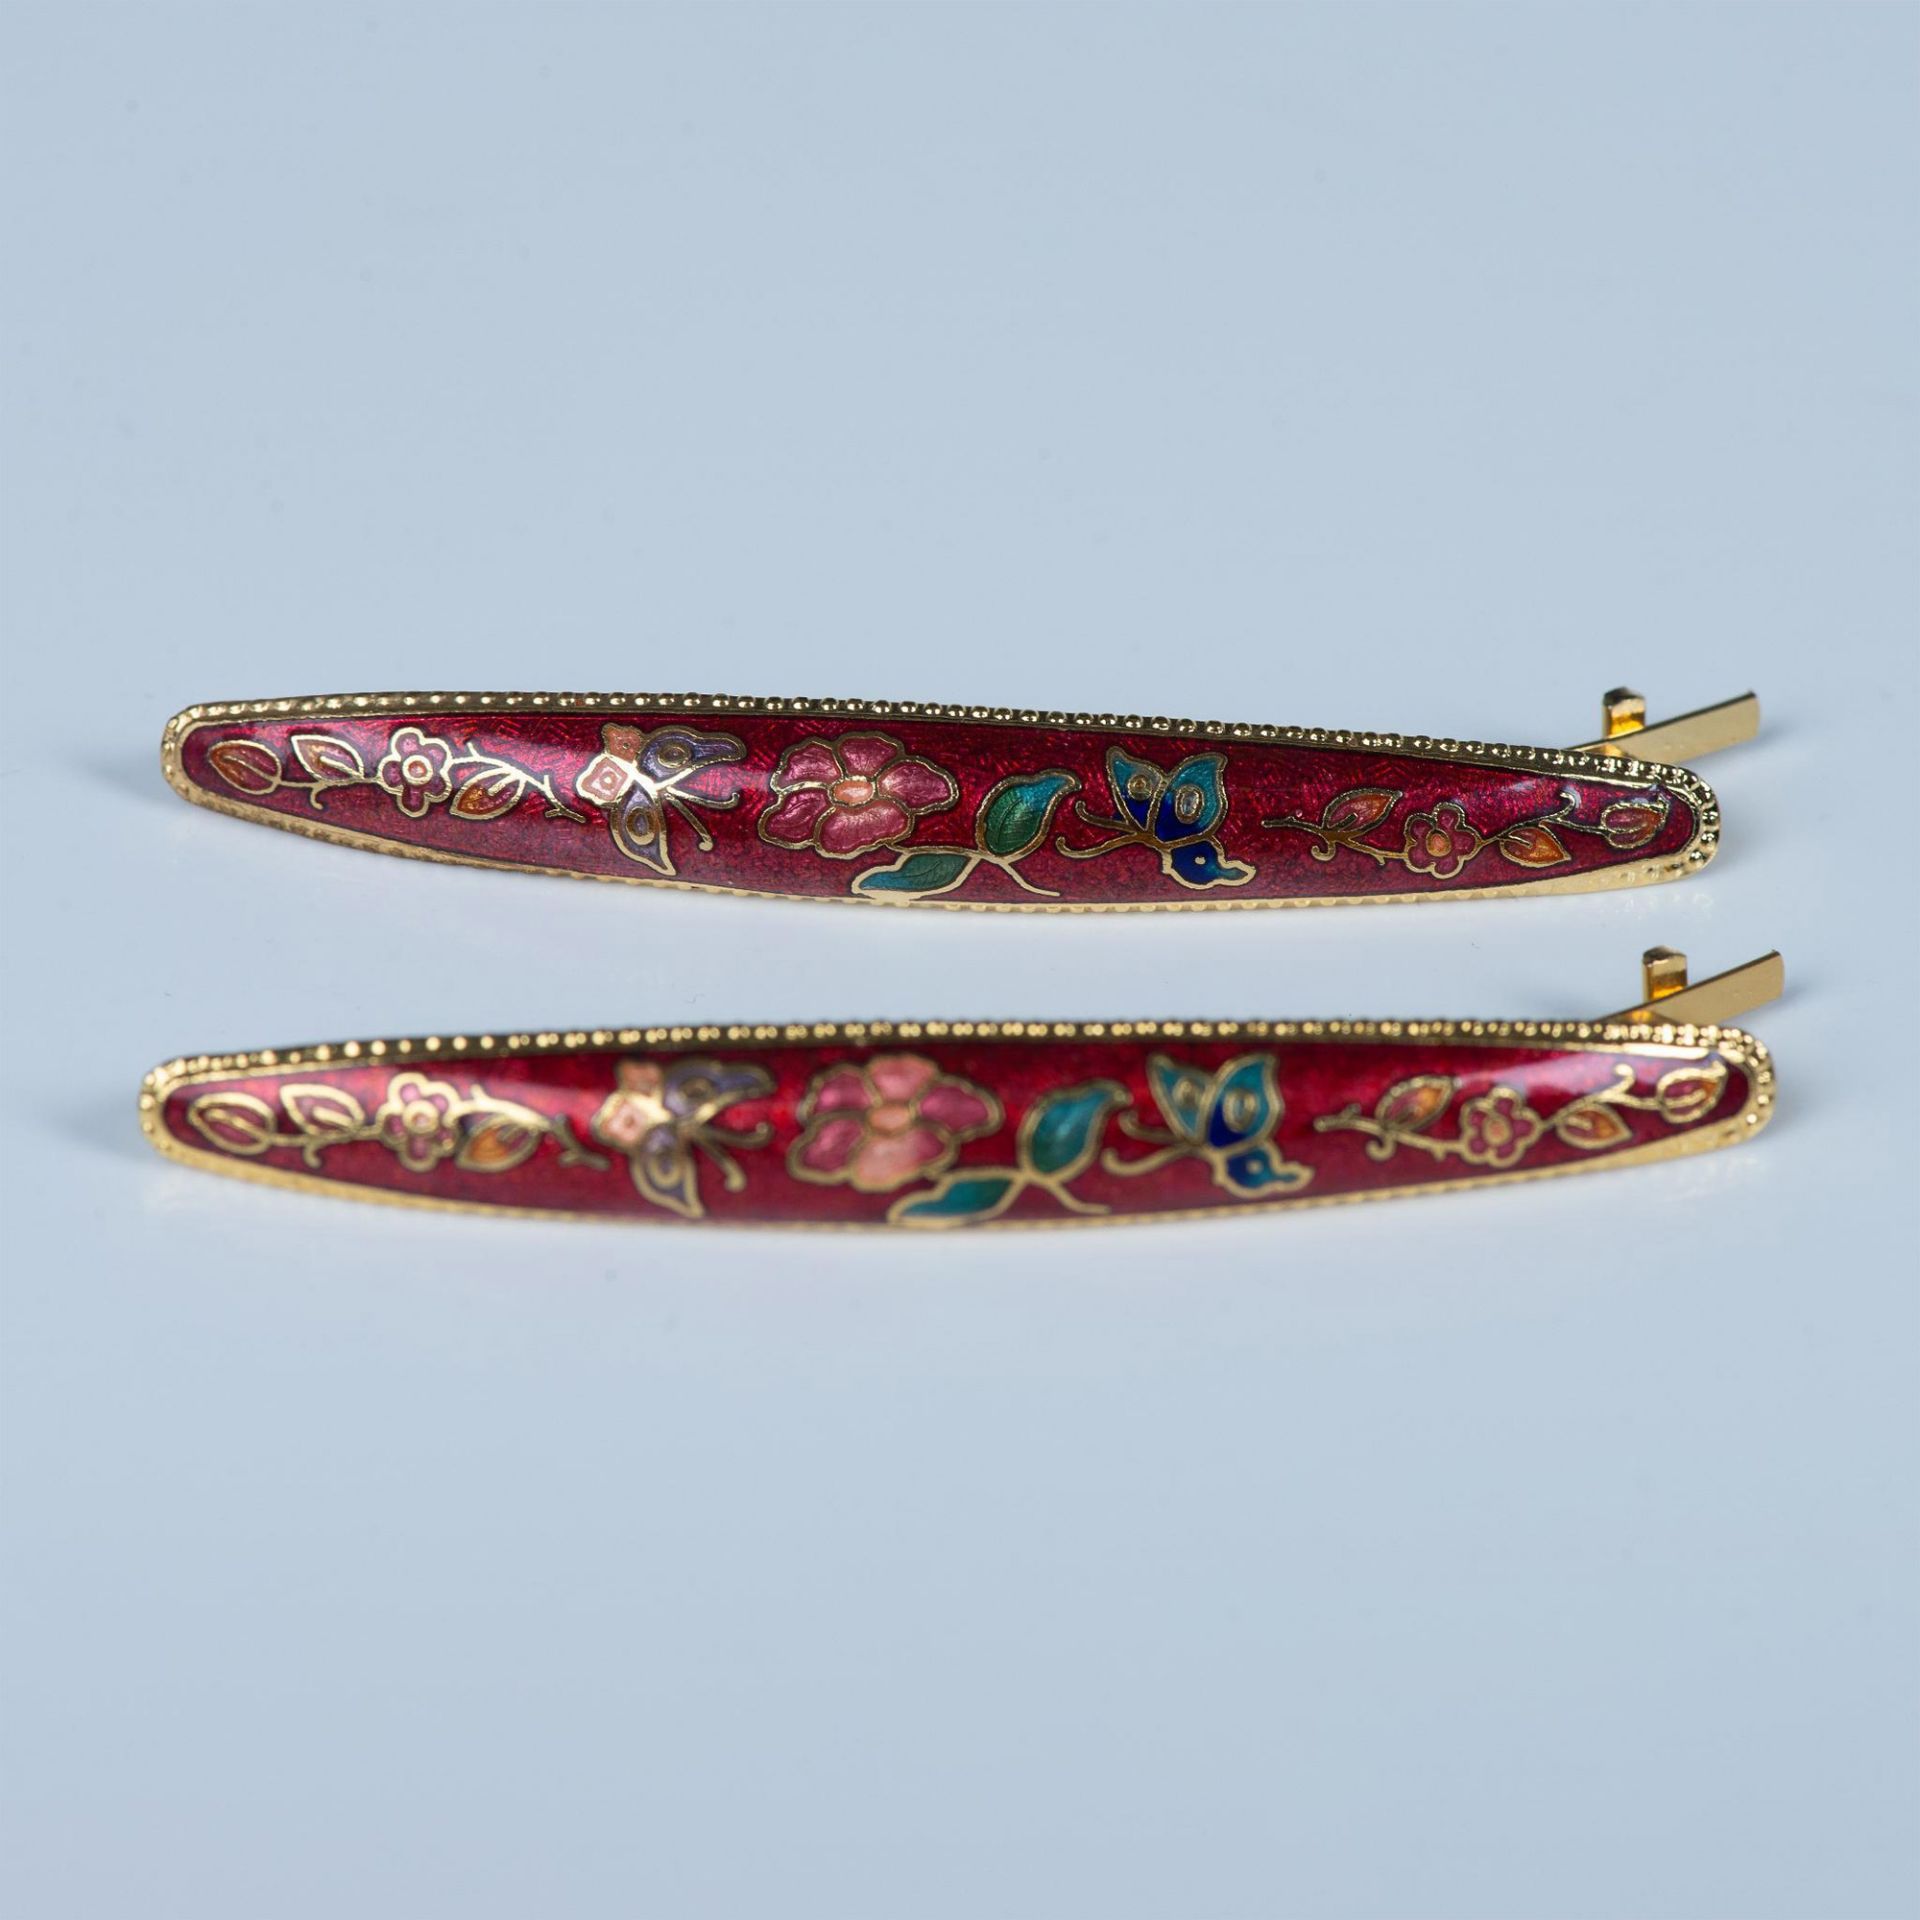 3 Pair of Cloisonne Hair Barrettes - Image 4 of 6